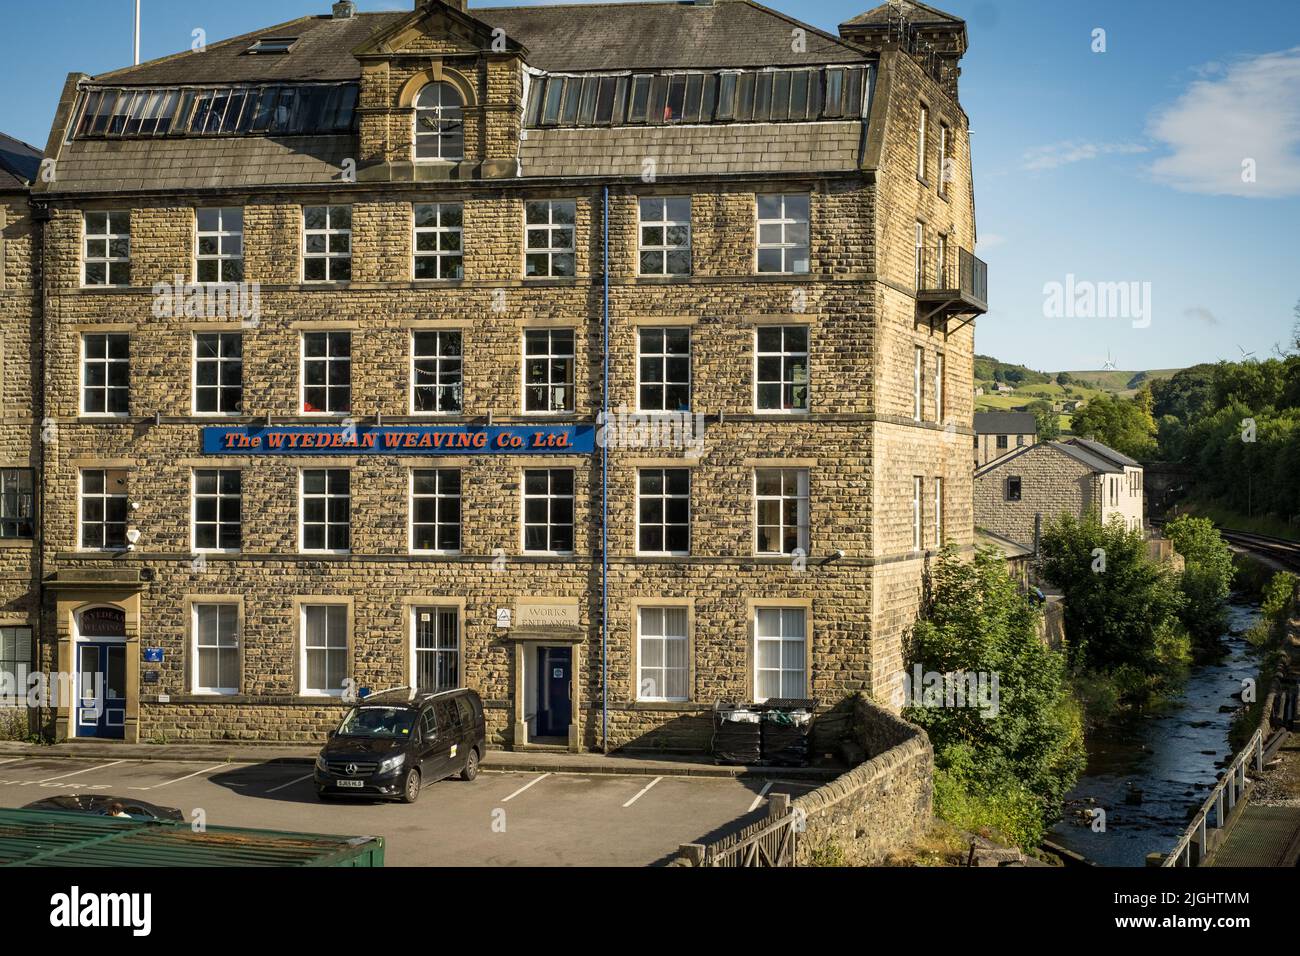 Haworth, West Yorkshire, UK. A traditional Mill building - The Wyedean Weaving Company. Stock Photo